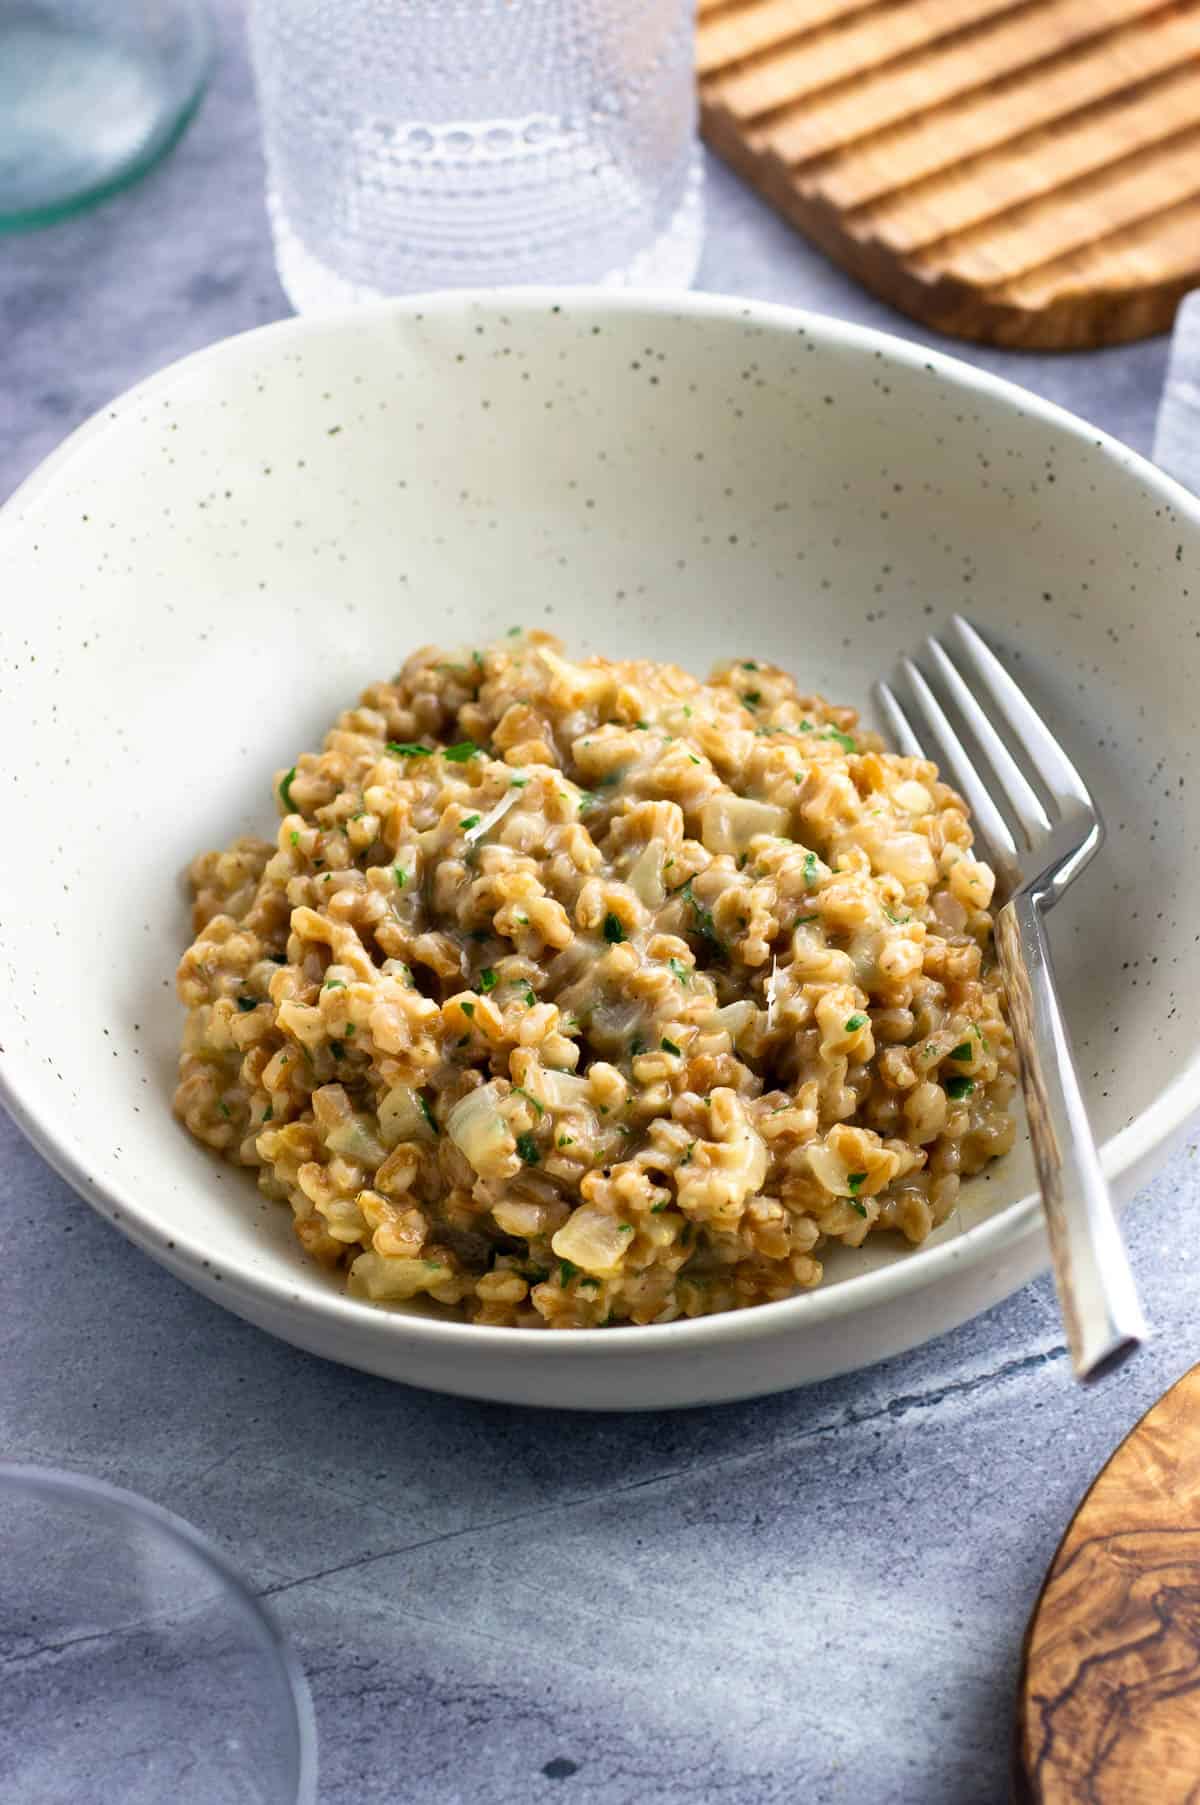 A serving of creamy farro risotto in a shallow bowl.